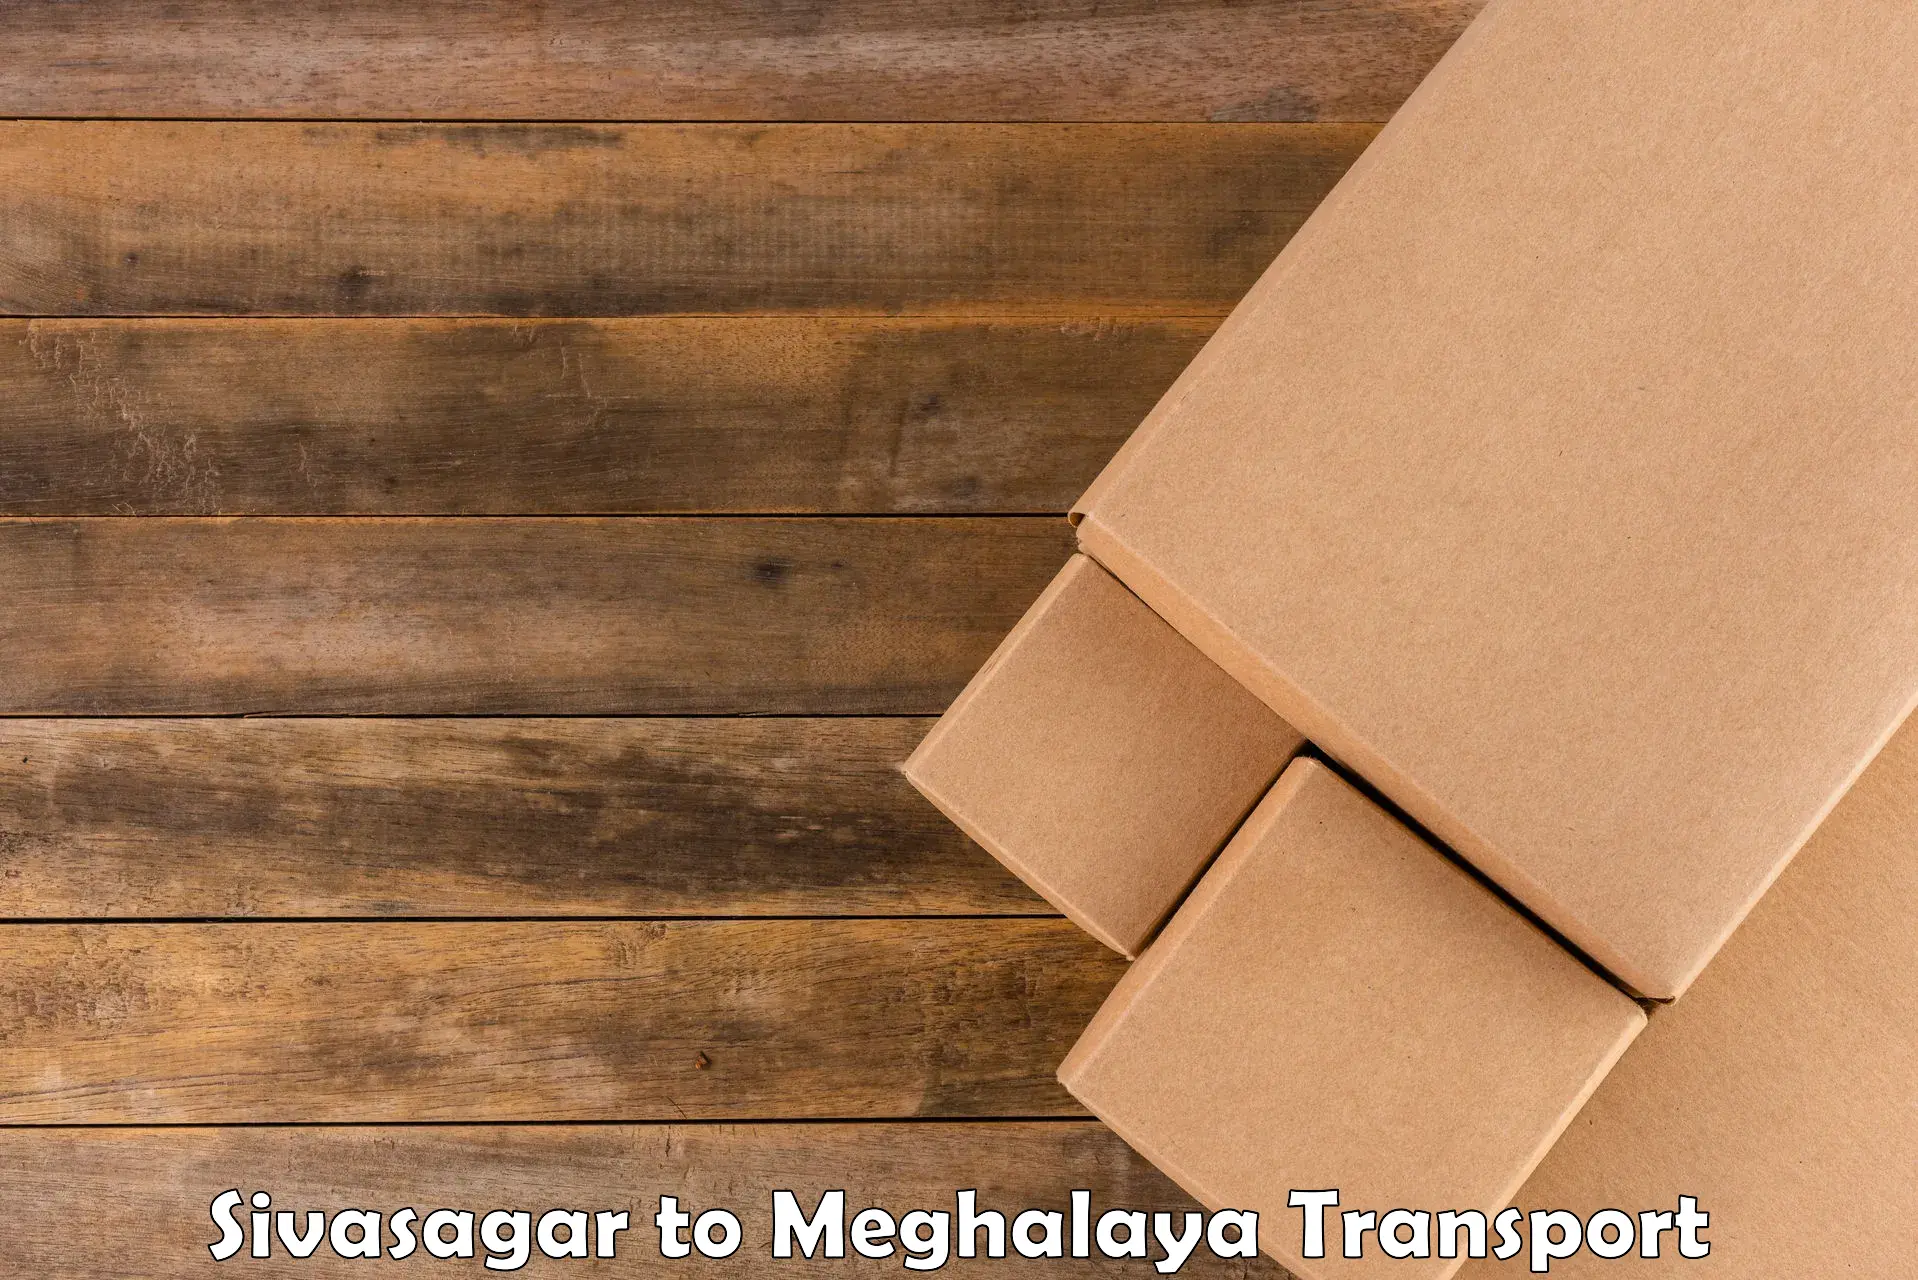 Luggage transport services in Sivasagar to Nongstoin